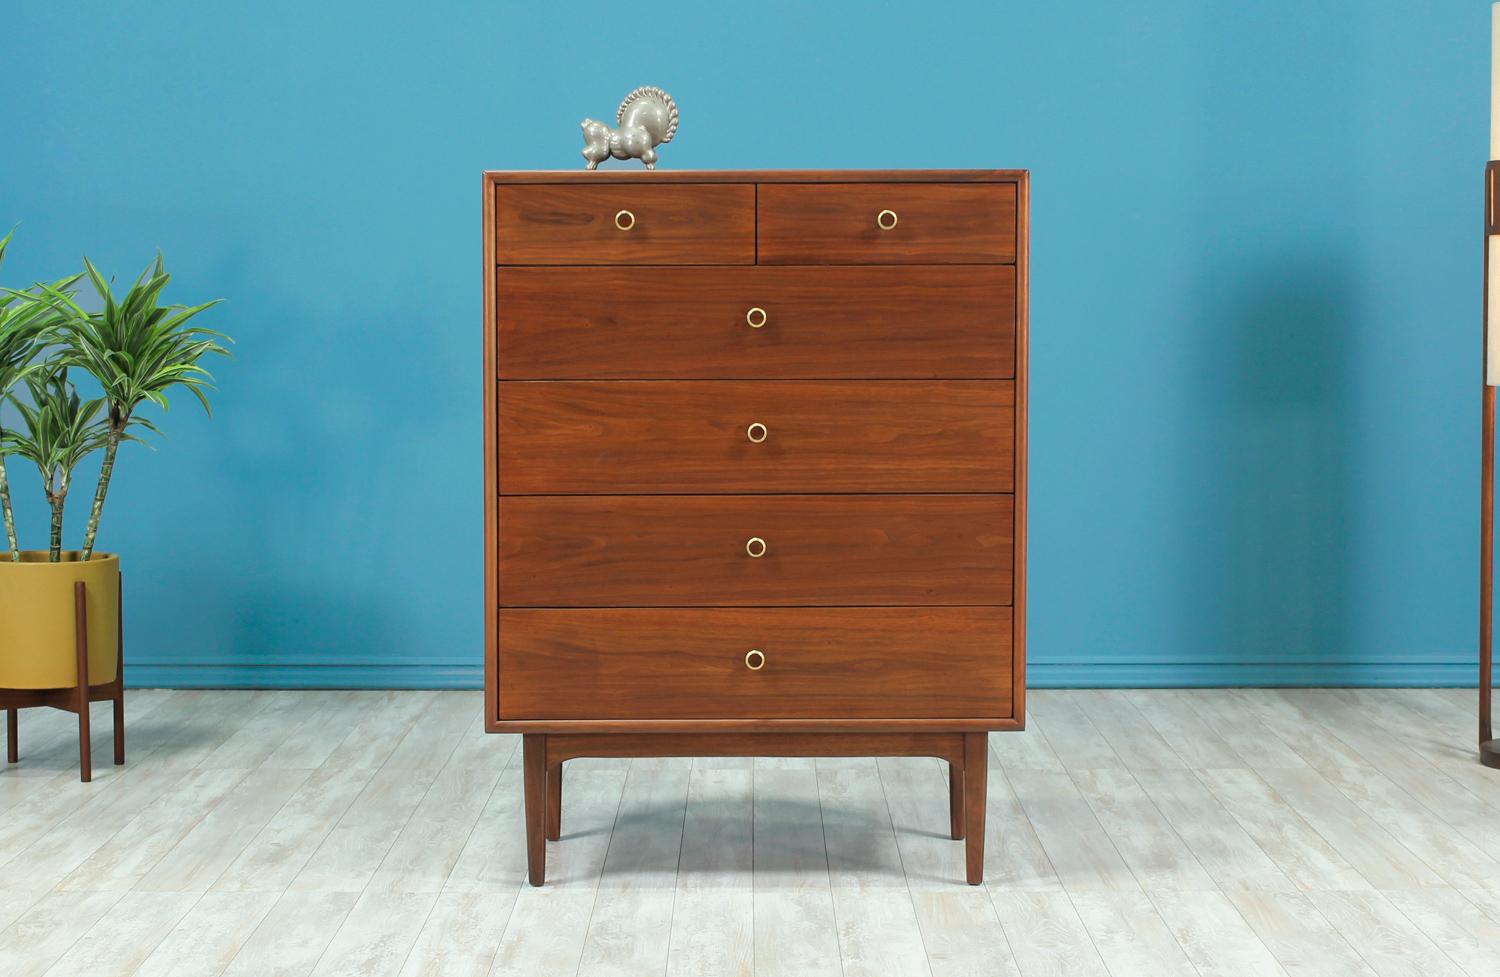 Stunning chest of drawers designed by Kipp Stewart & Stewart MacDougall for Drexels Declaration line in the United States circa 1960’s. The chest features six walnut wood dovetailed drawers adorned by their original brass pulls with walnut inlay.